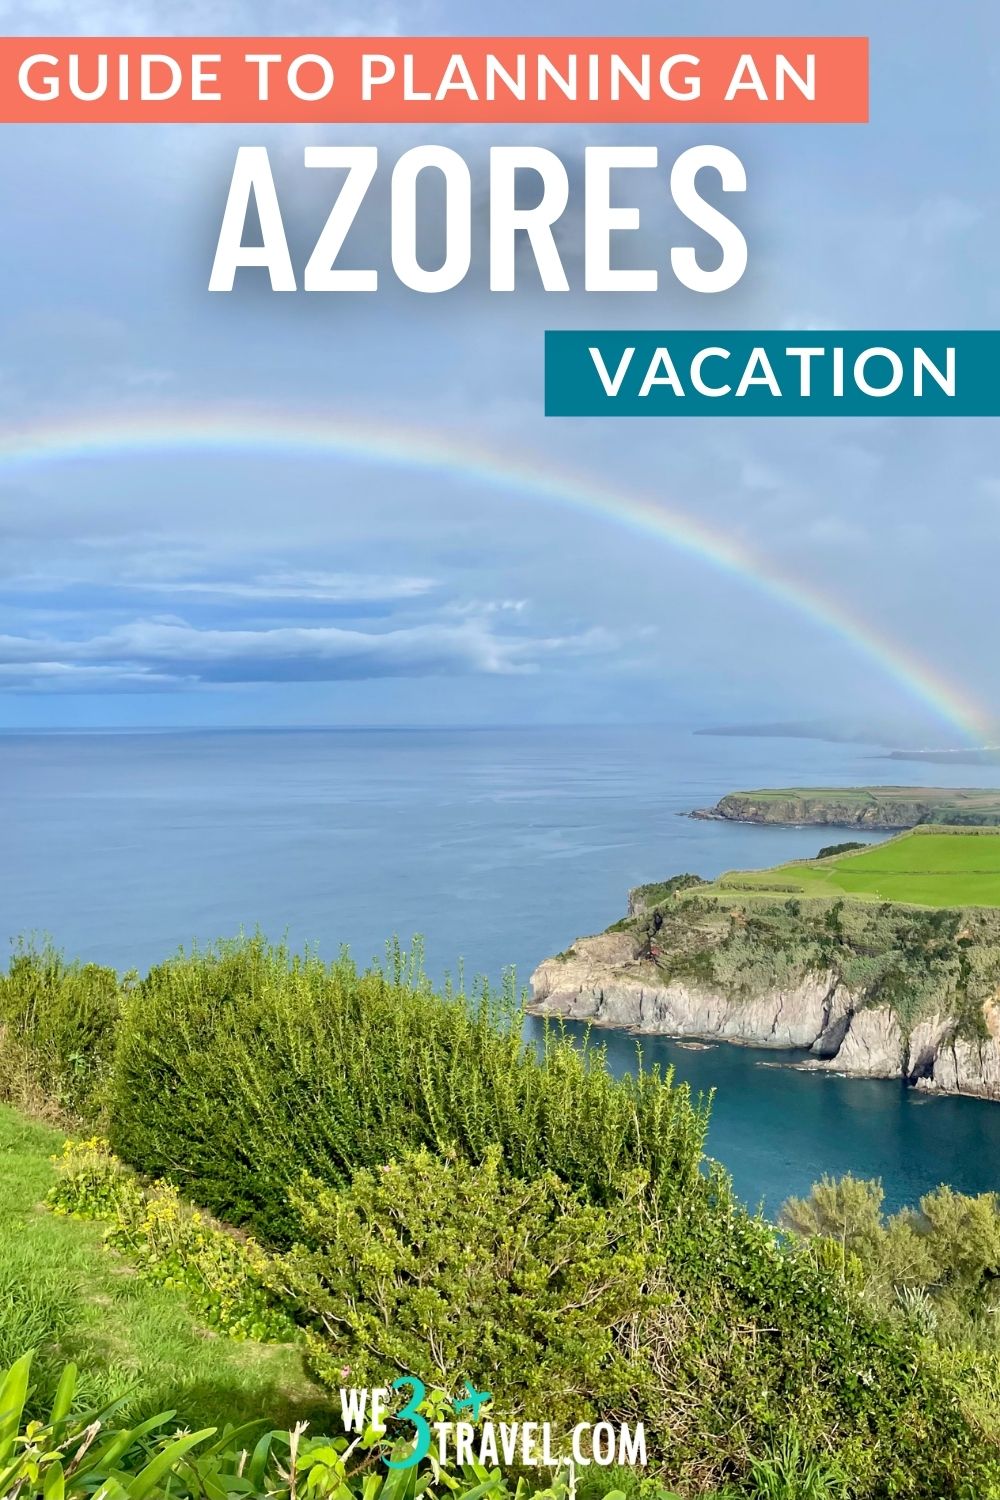 Planning a trip to the Azores